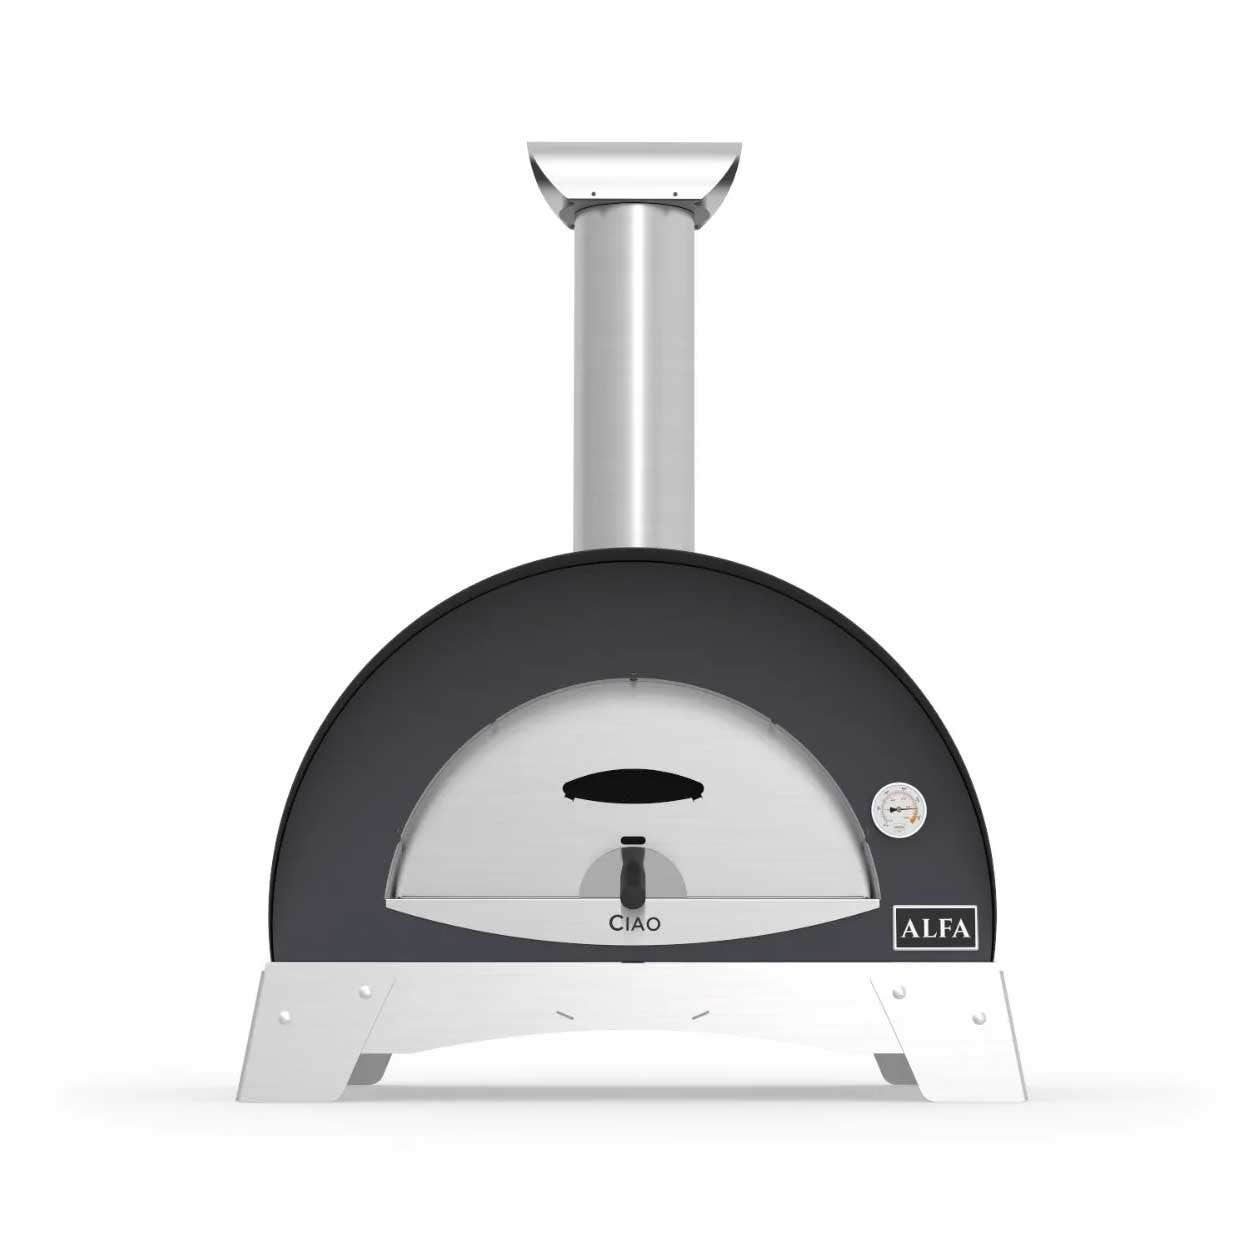 Alfa Ciao Wood Fired Outdoor Pizza Oven Pizza Makers & Ovens